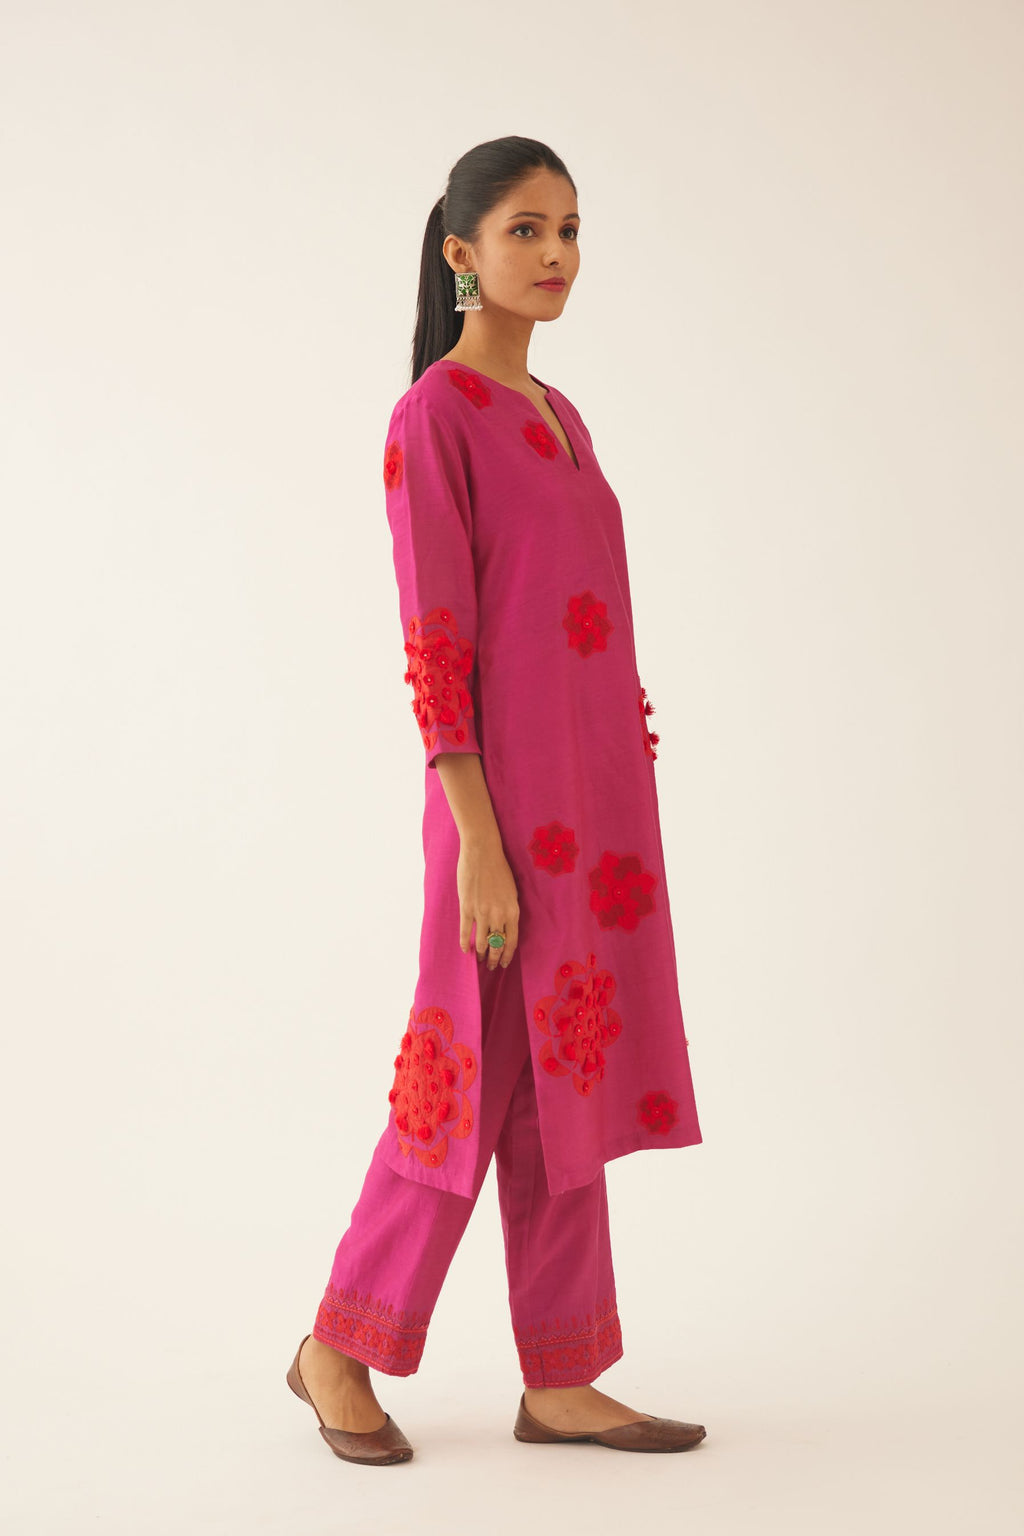 Fushcia silk chanderi straight kurta set with 3/4th sleeve, highlighted with red patch, tassles & sequence work.